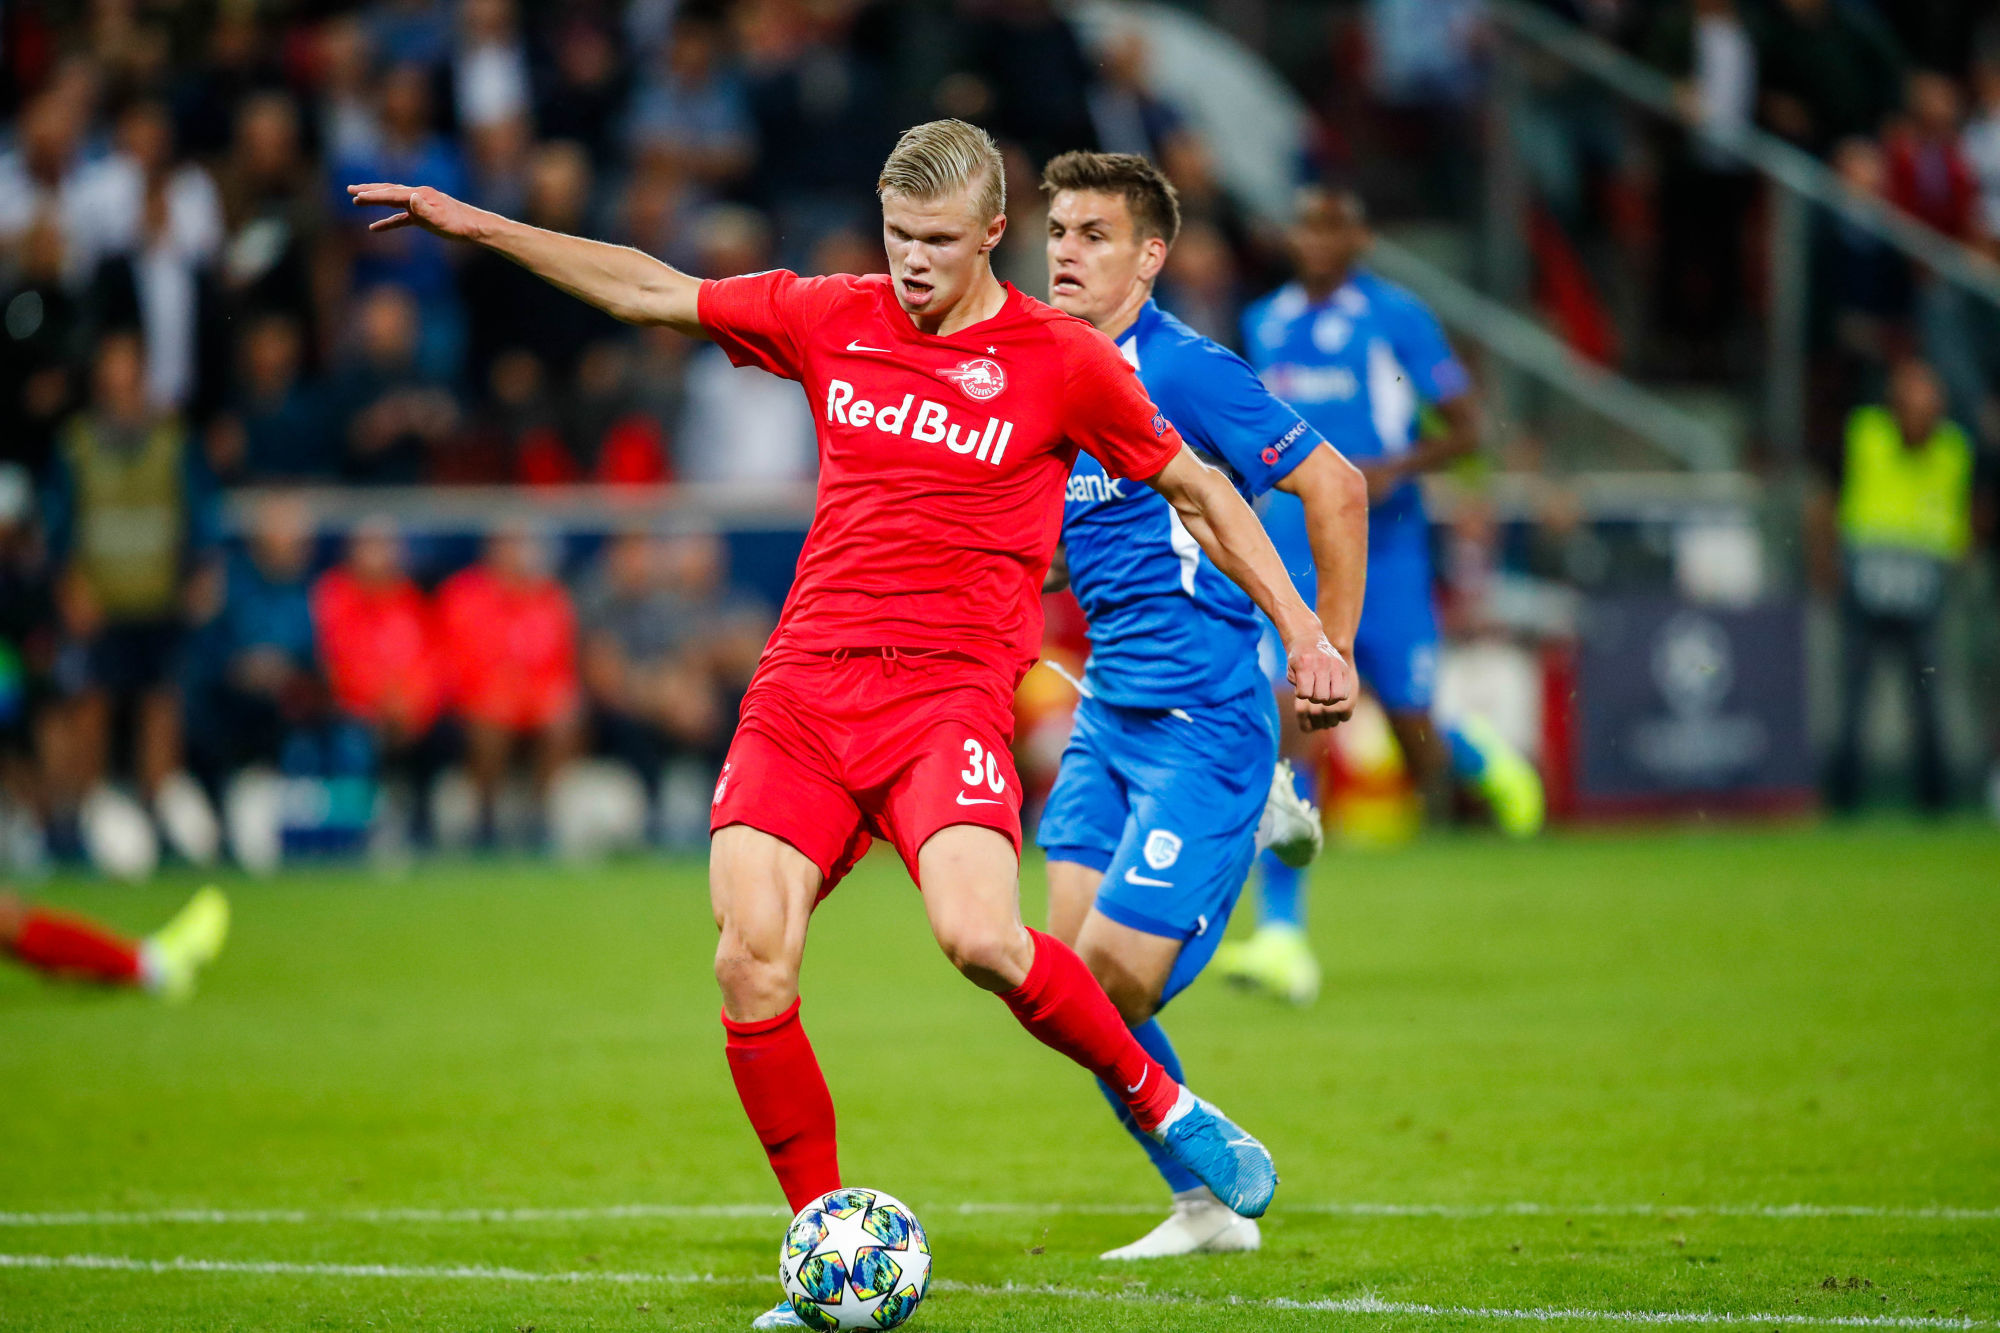 SALZBURG,AUSTRIA,17.SEP.19 - SOCCER - UEFA Champions League, group stage, Red Bull Salzburg vs KRC Genk. Image shows Erling Haaland (RBS) and Joakim Maehle (Genk), Keywords: goal shot. Photo: GEPA pictures/ Jasmin Walter 

Photo by Icon Sport - Erling HAALAND - Red Bull Arena - Salzbourg (Autriche)